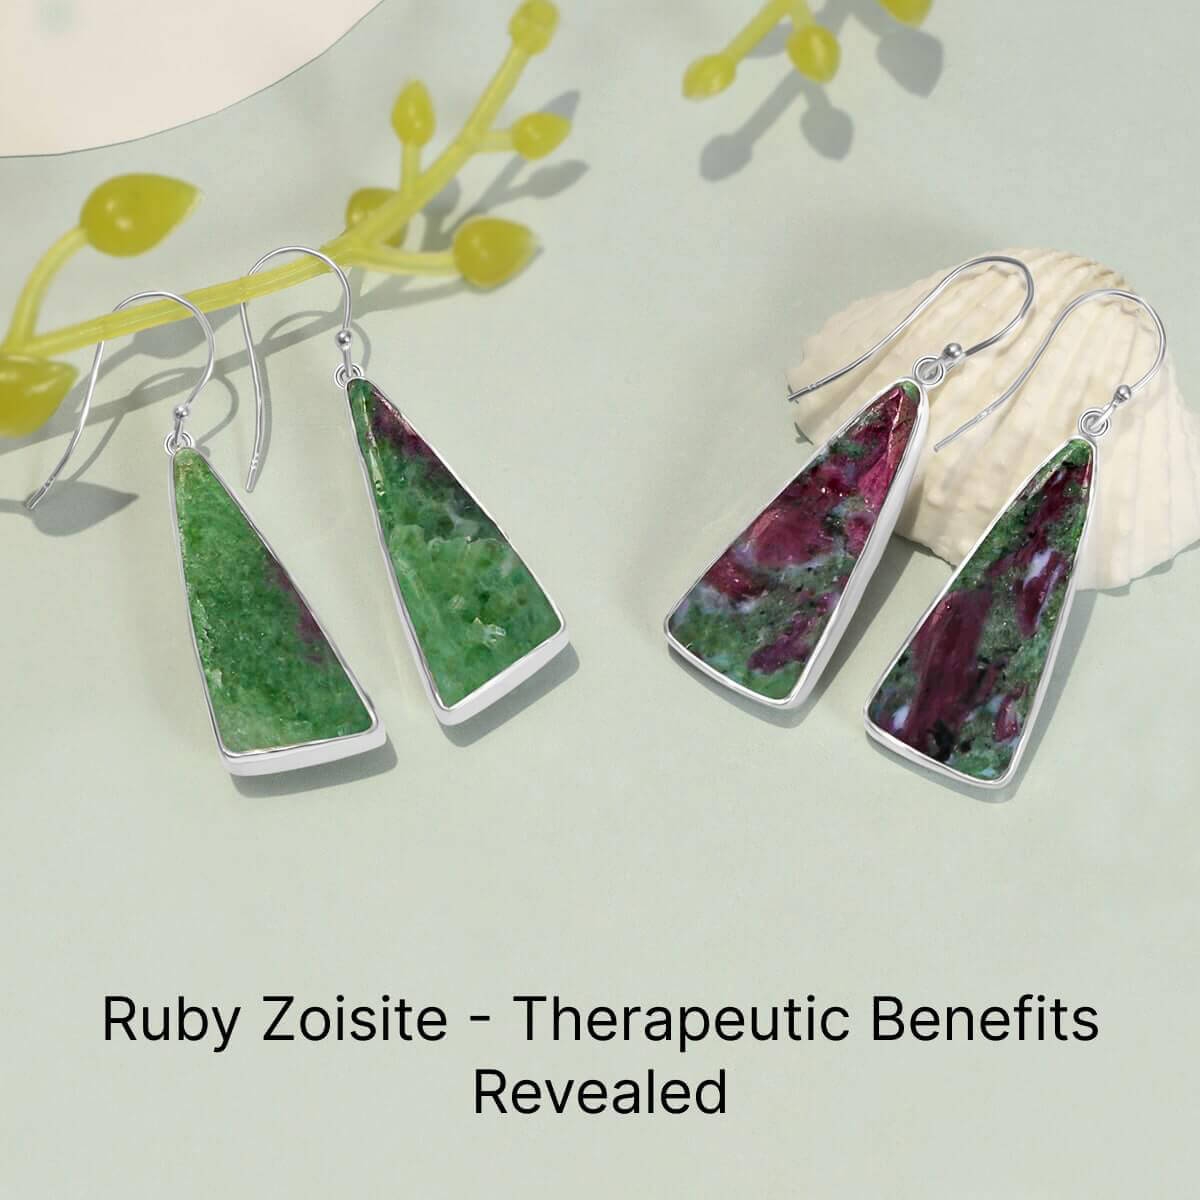 Advantages and Therapeutic Qualities of Ruby Zoisite